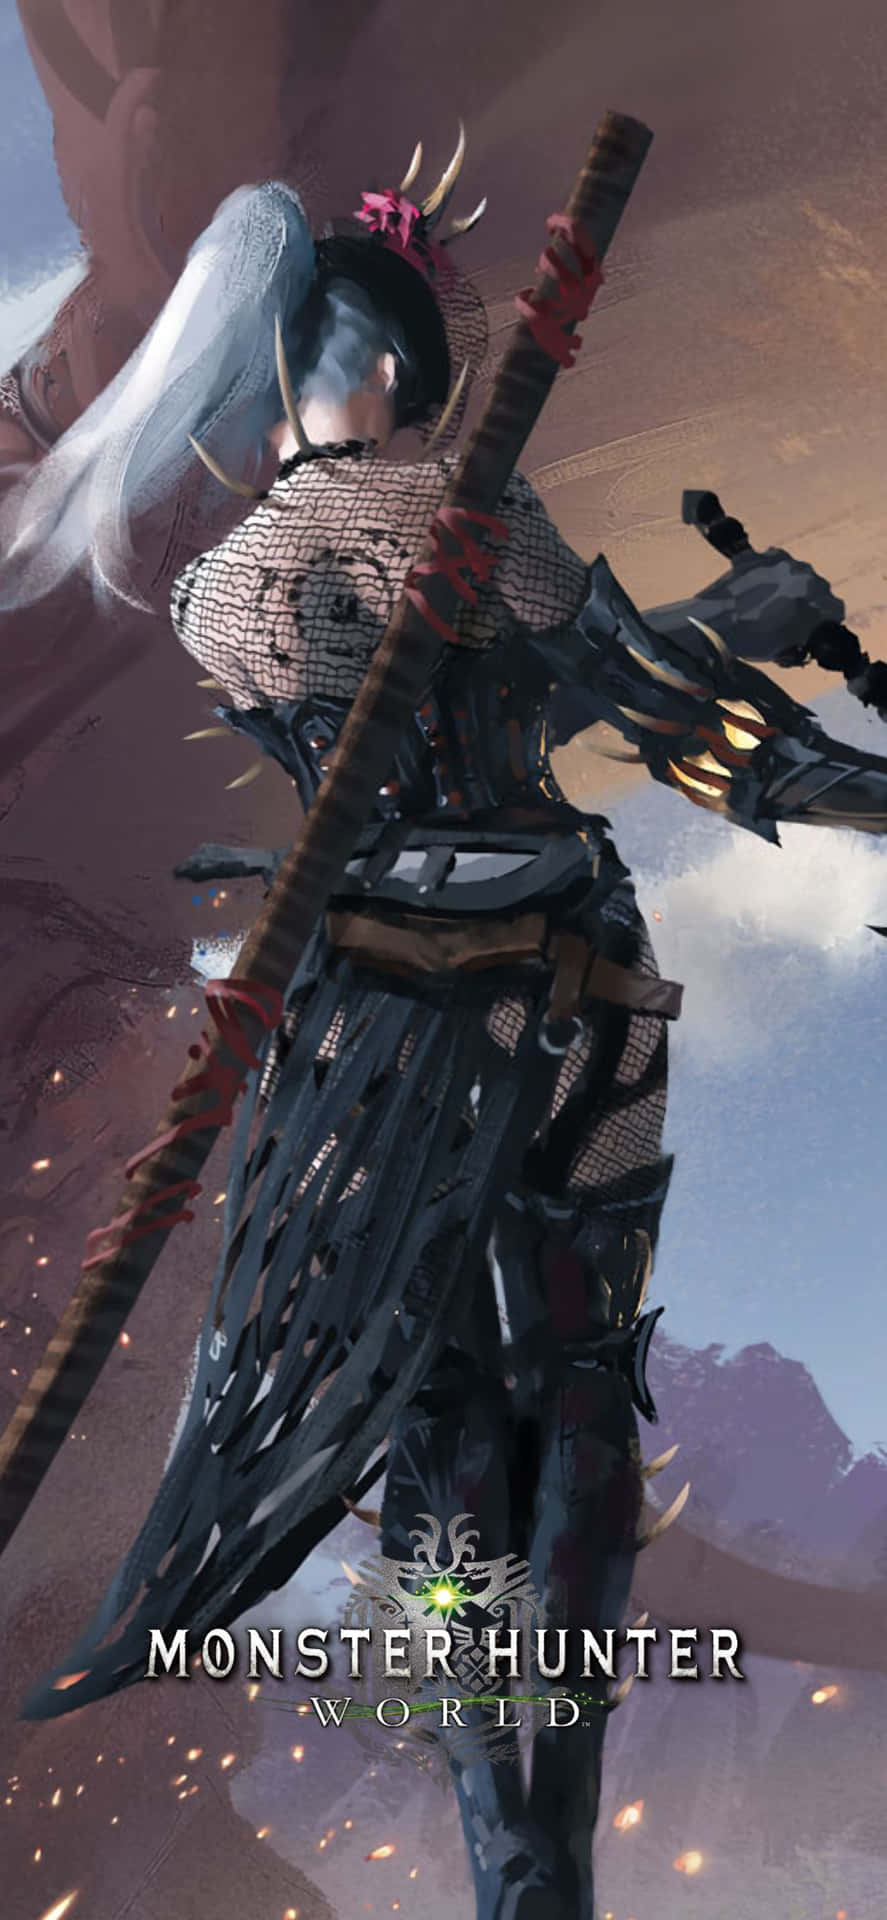 Iphone Xs Max Monster Woman Hunter World Background